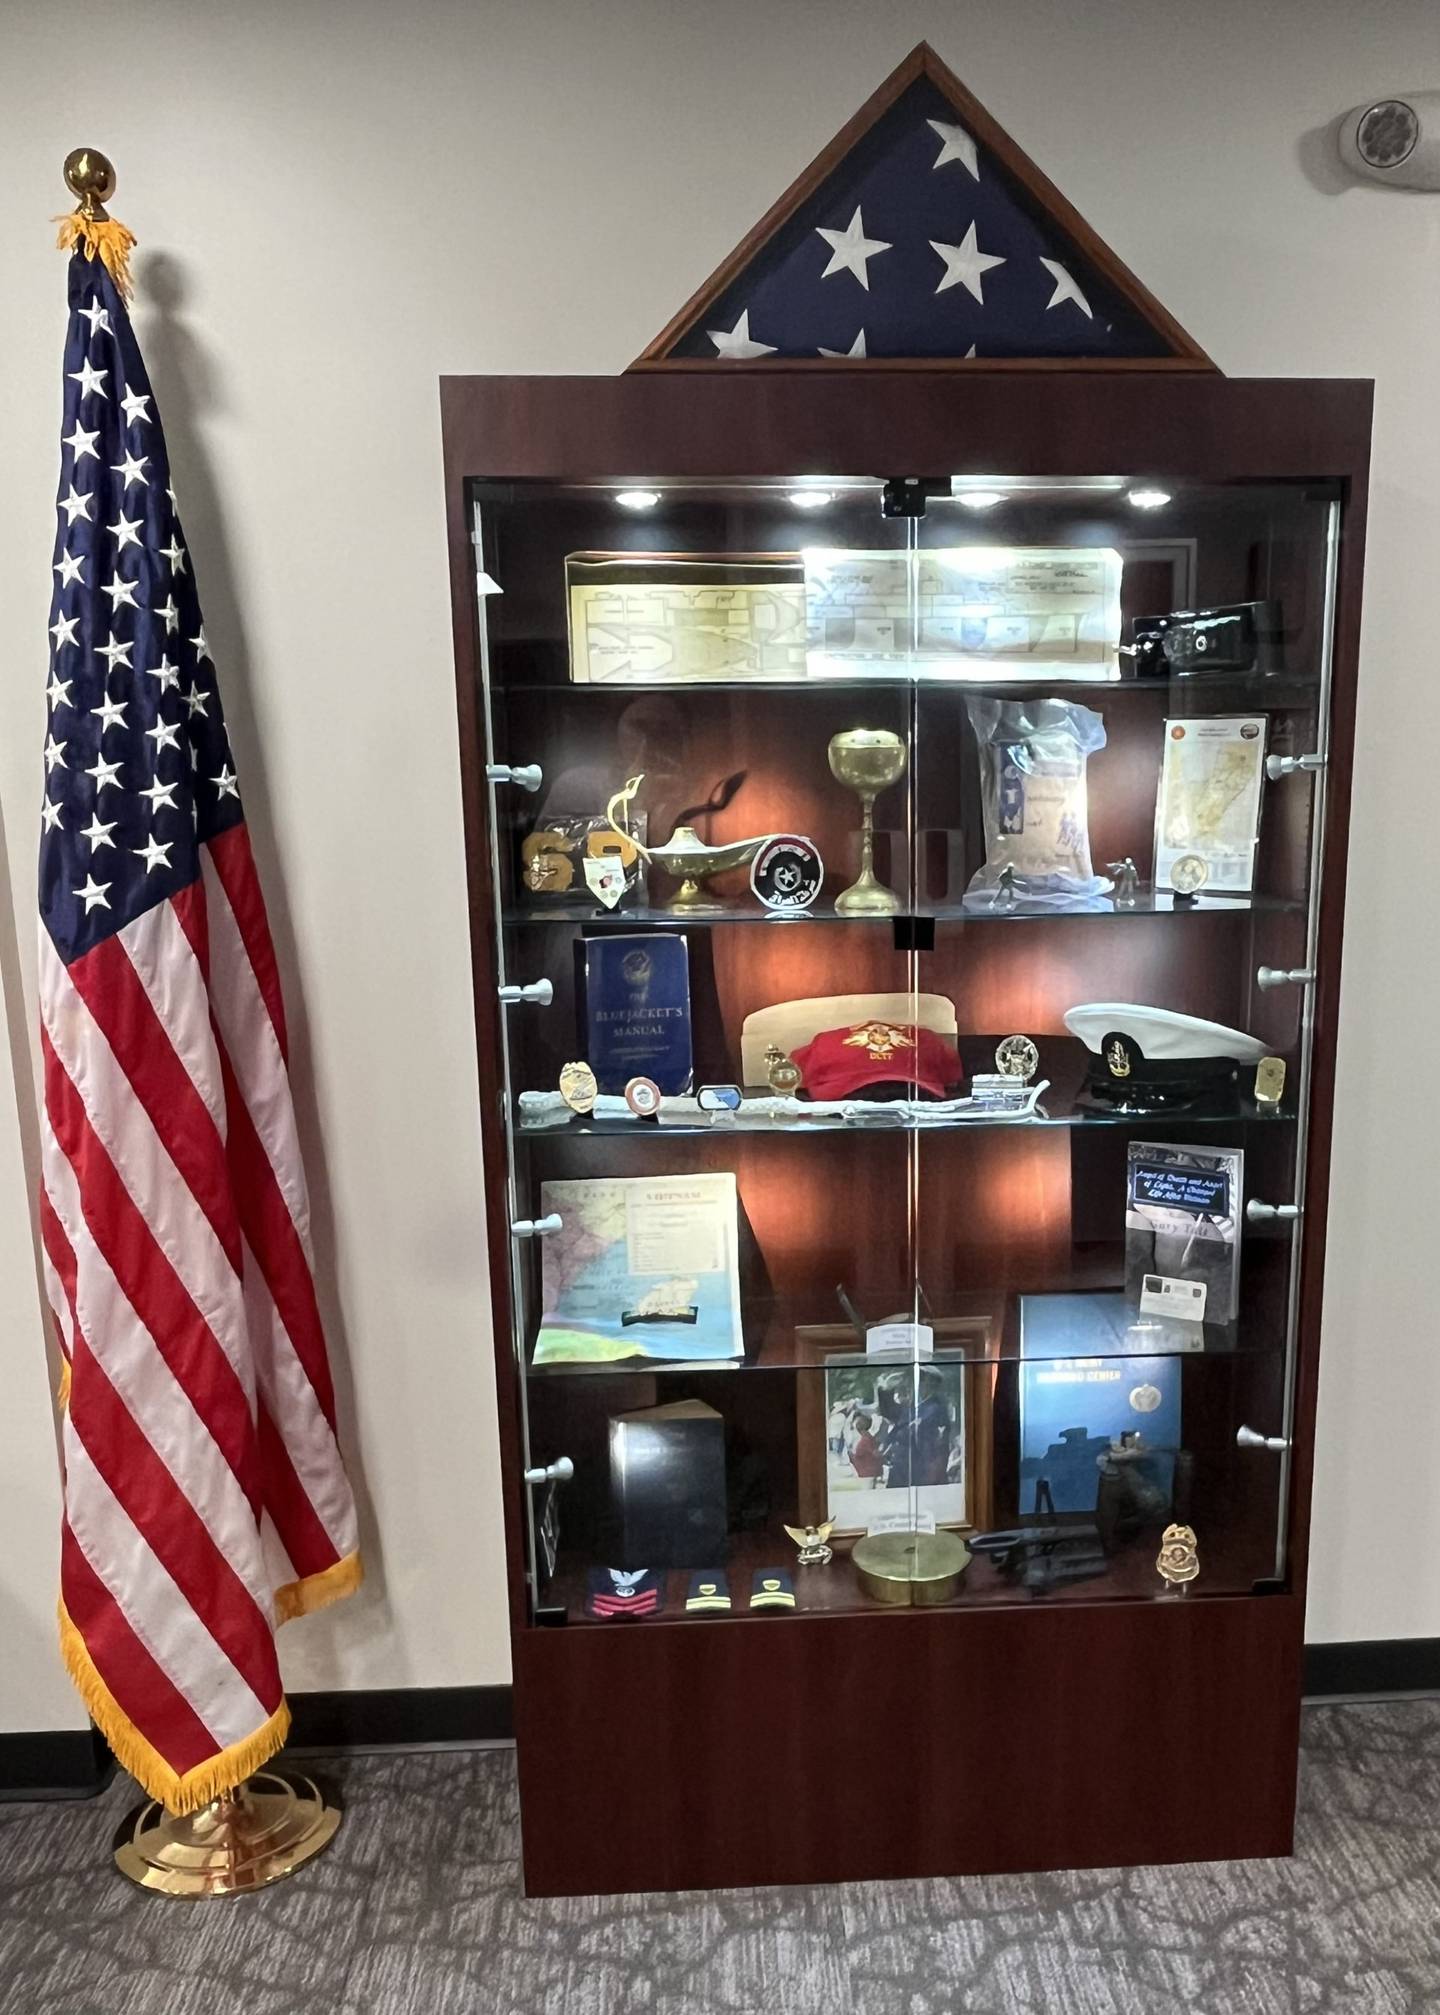 The Lockport Township veterans memorial cabinet contains items donated by local veterans.